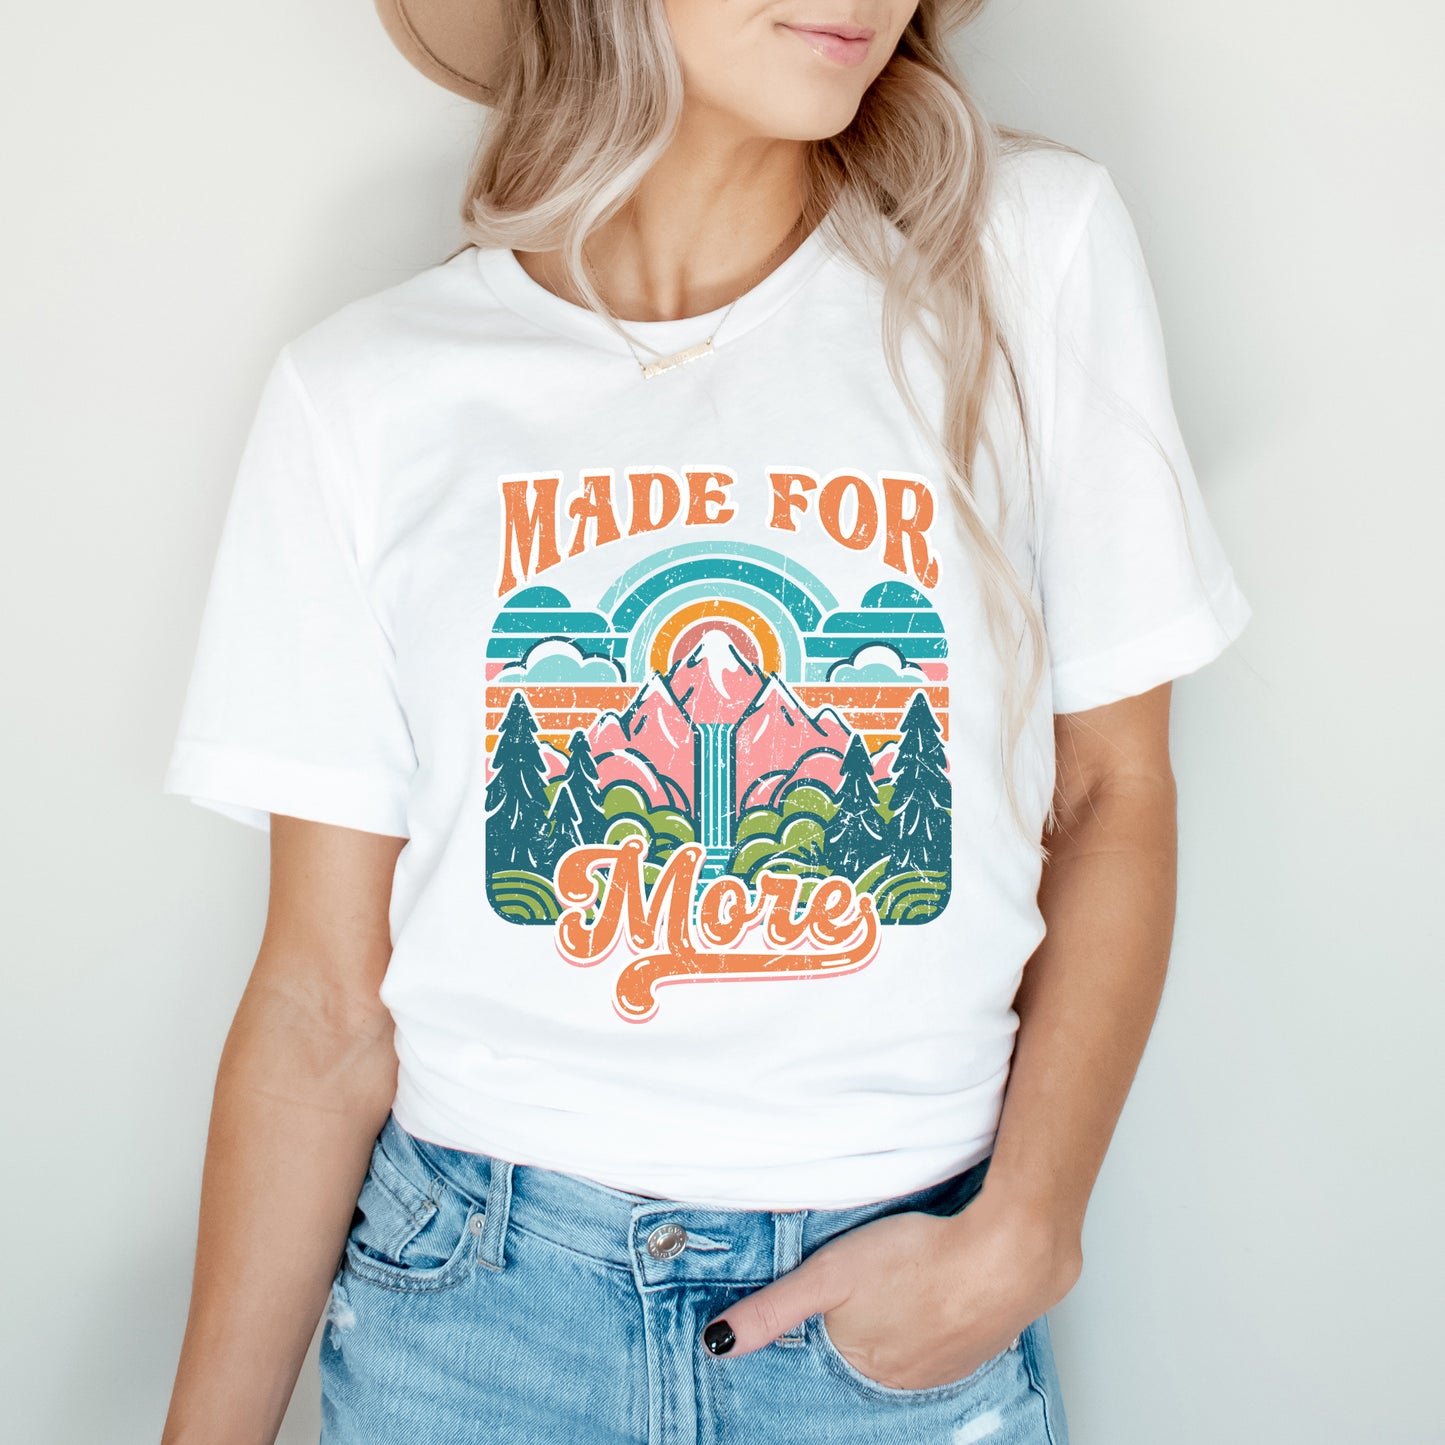 Made For More Mountains | Short Sleeve Crew Neck